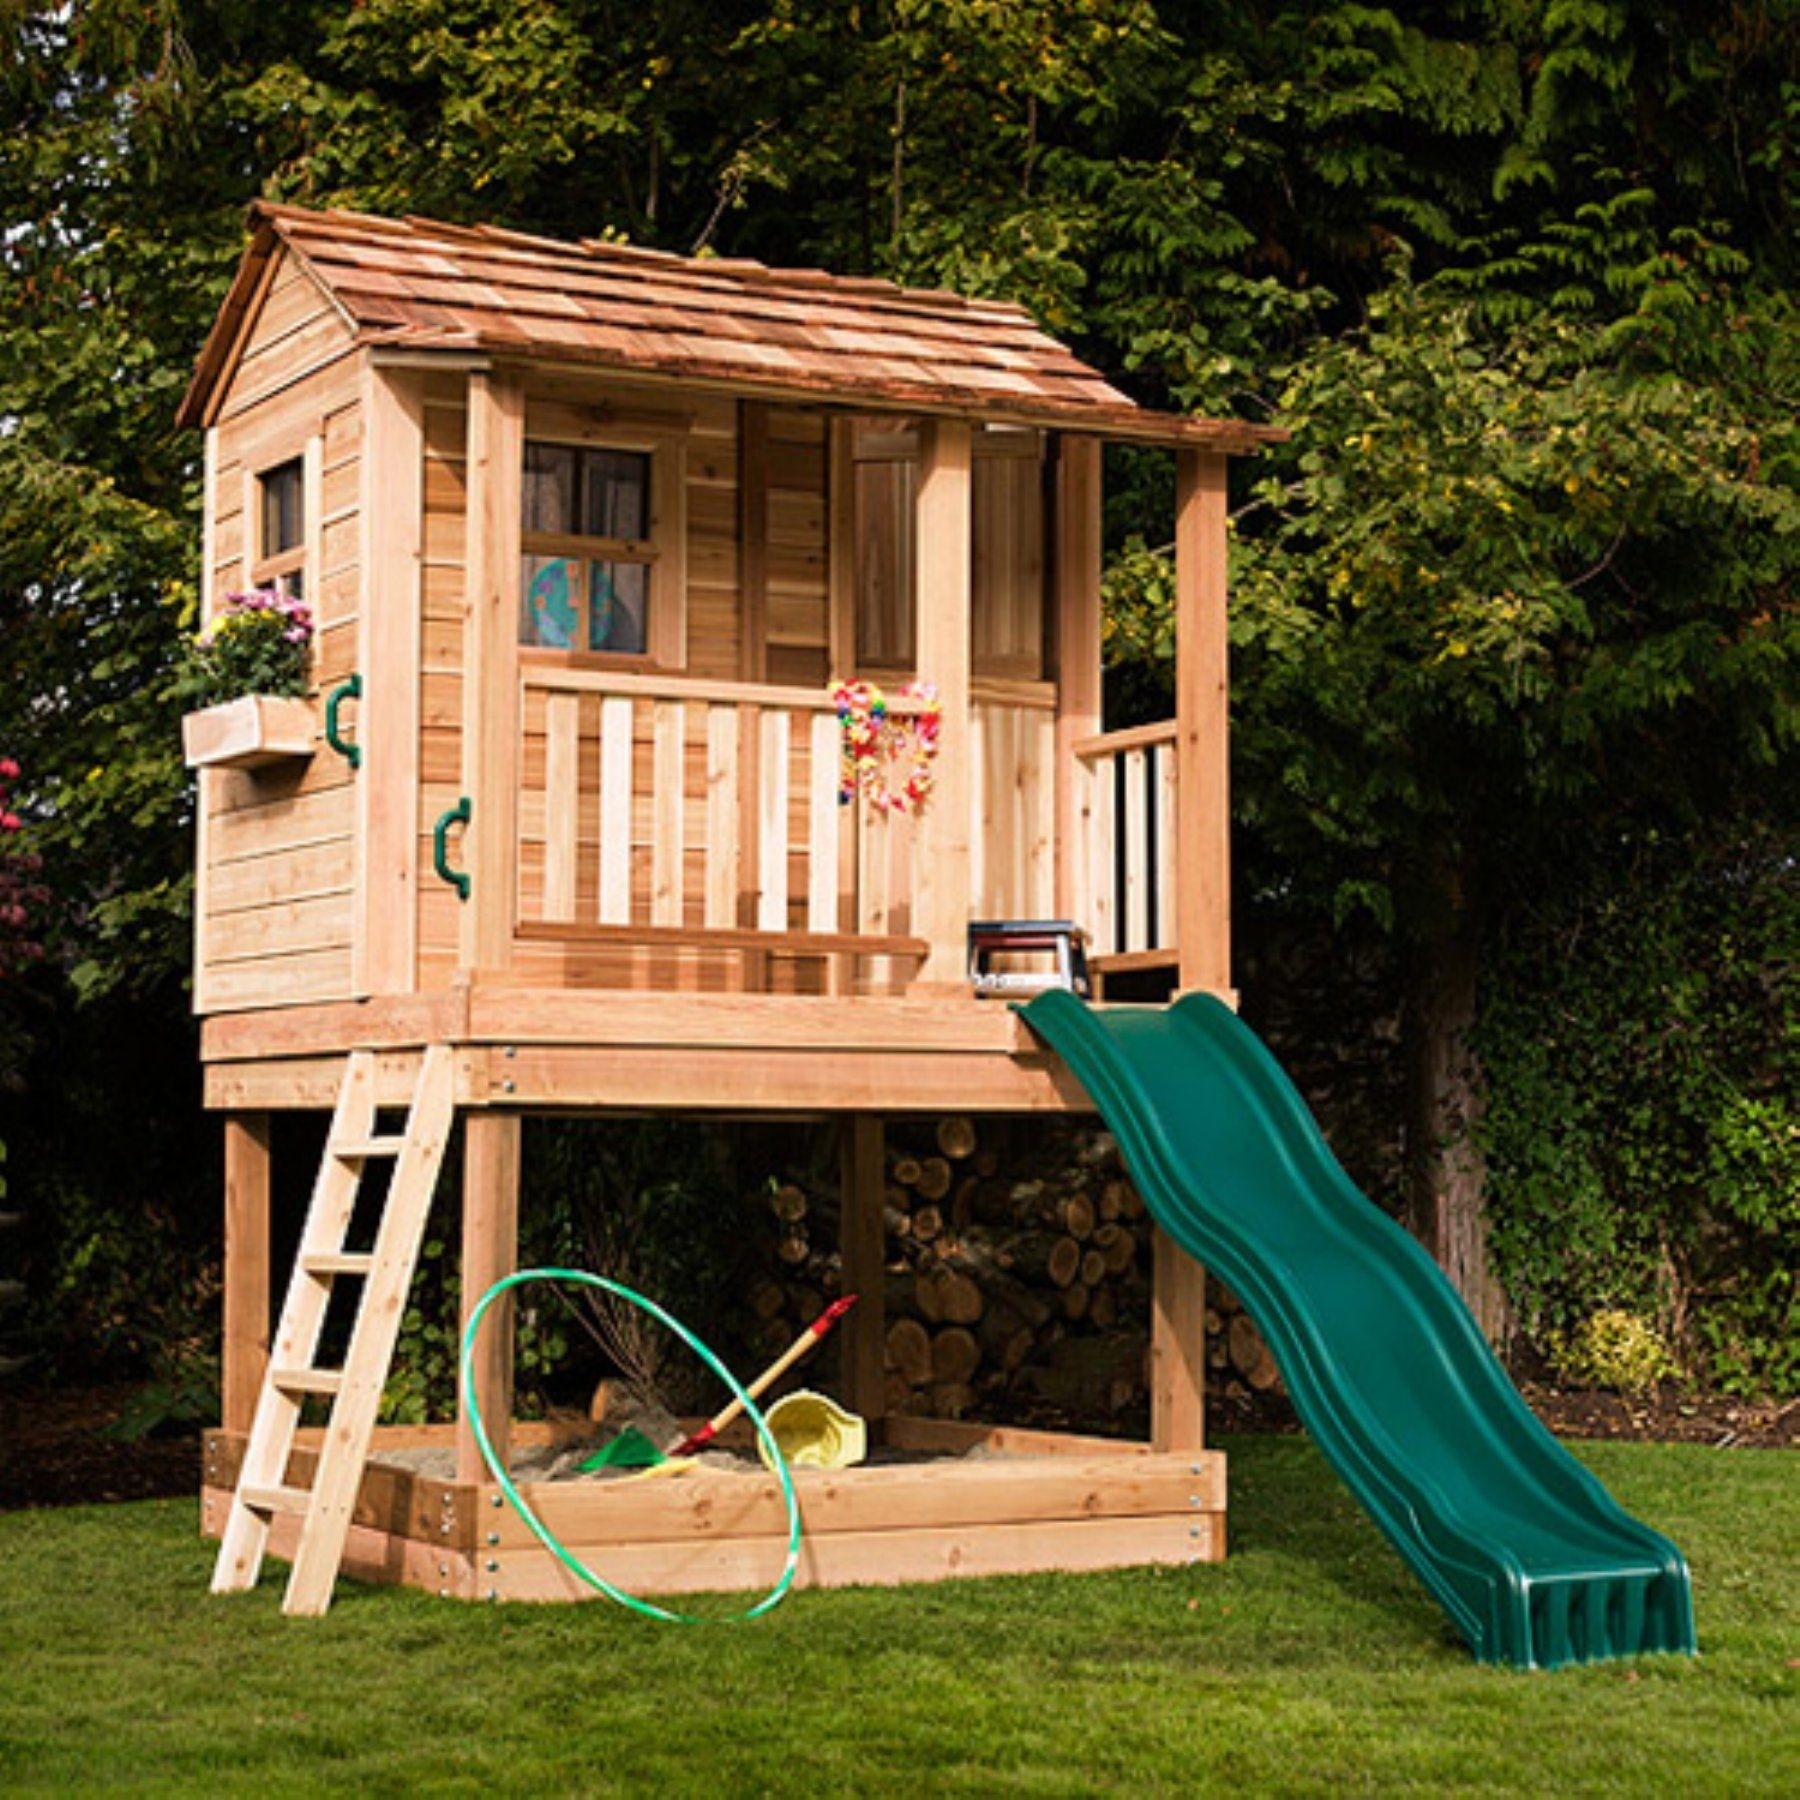 How To Build A Two Story Playhouse